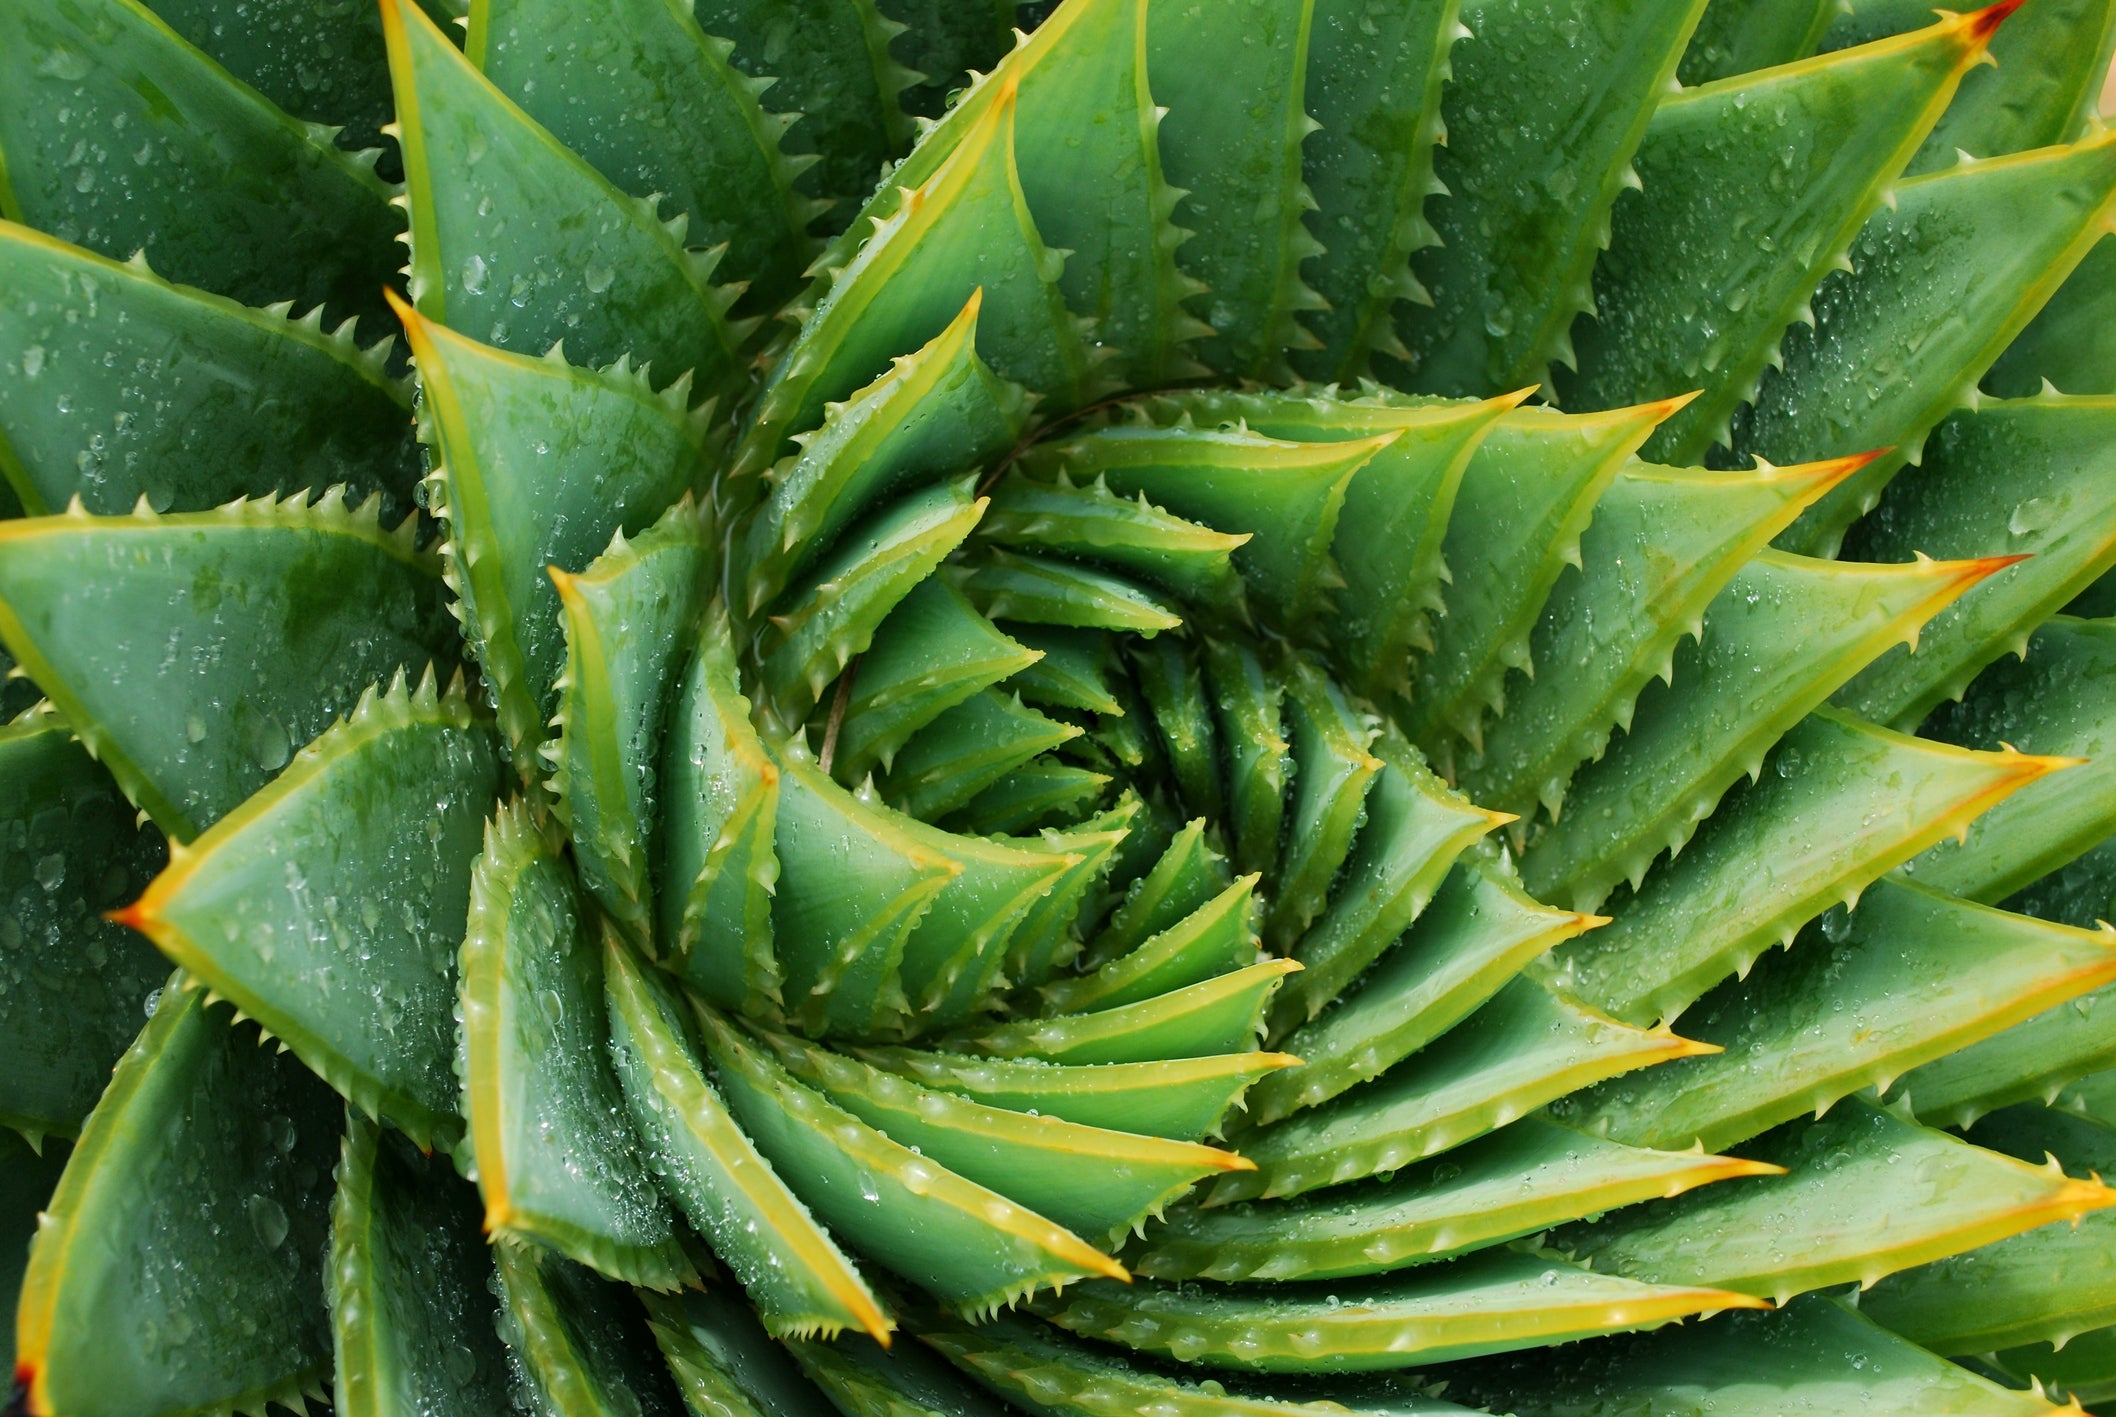 Aloe vera can be eaten, and is often juiced or pulped